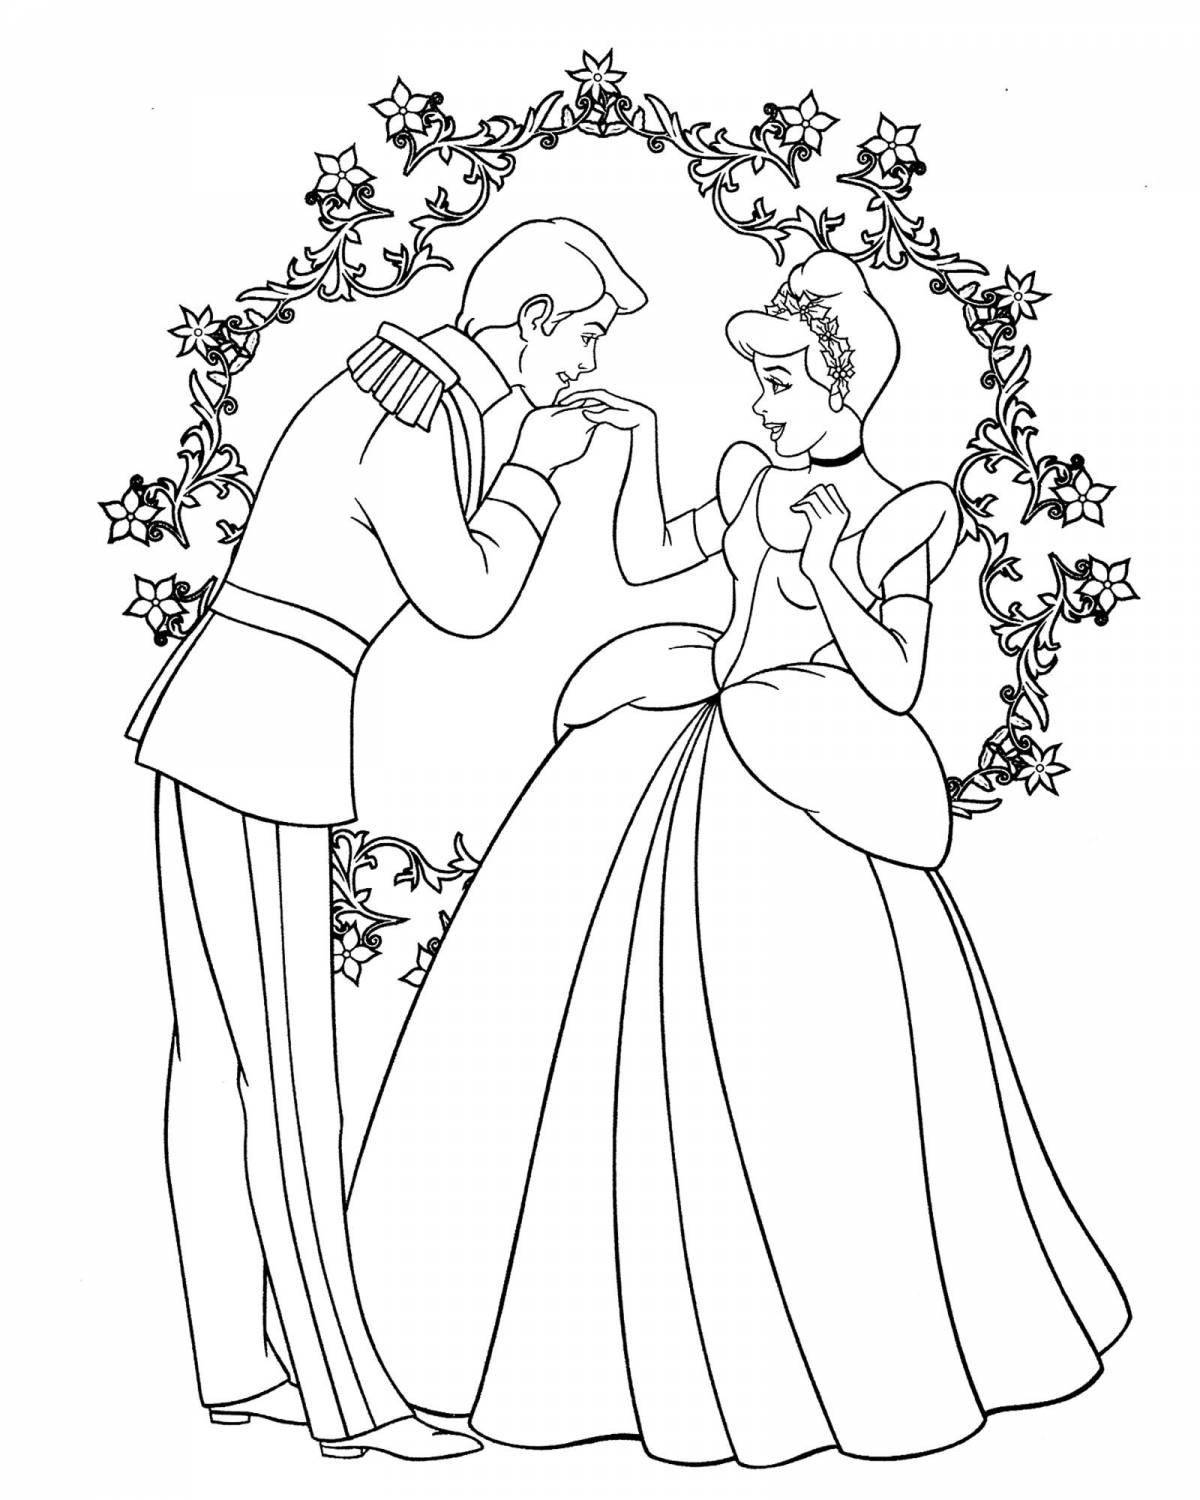 Adorable princess and prince coloring book for kids